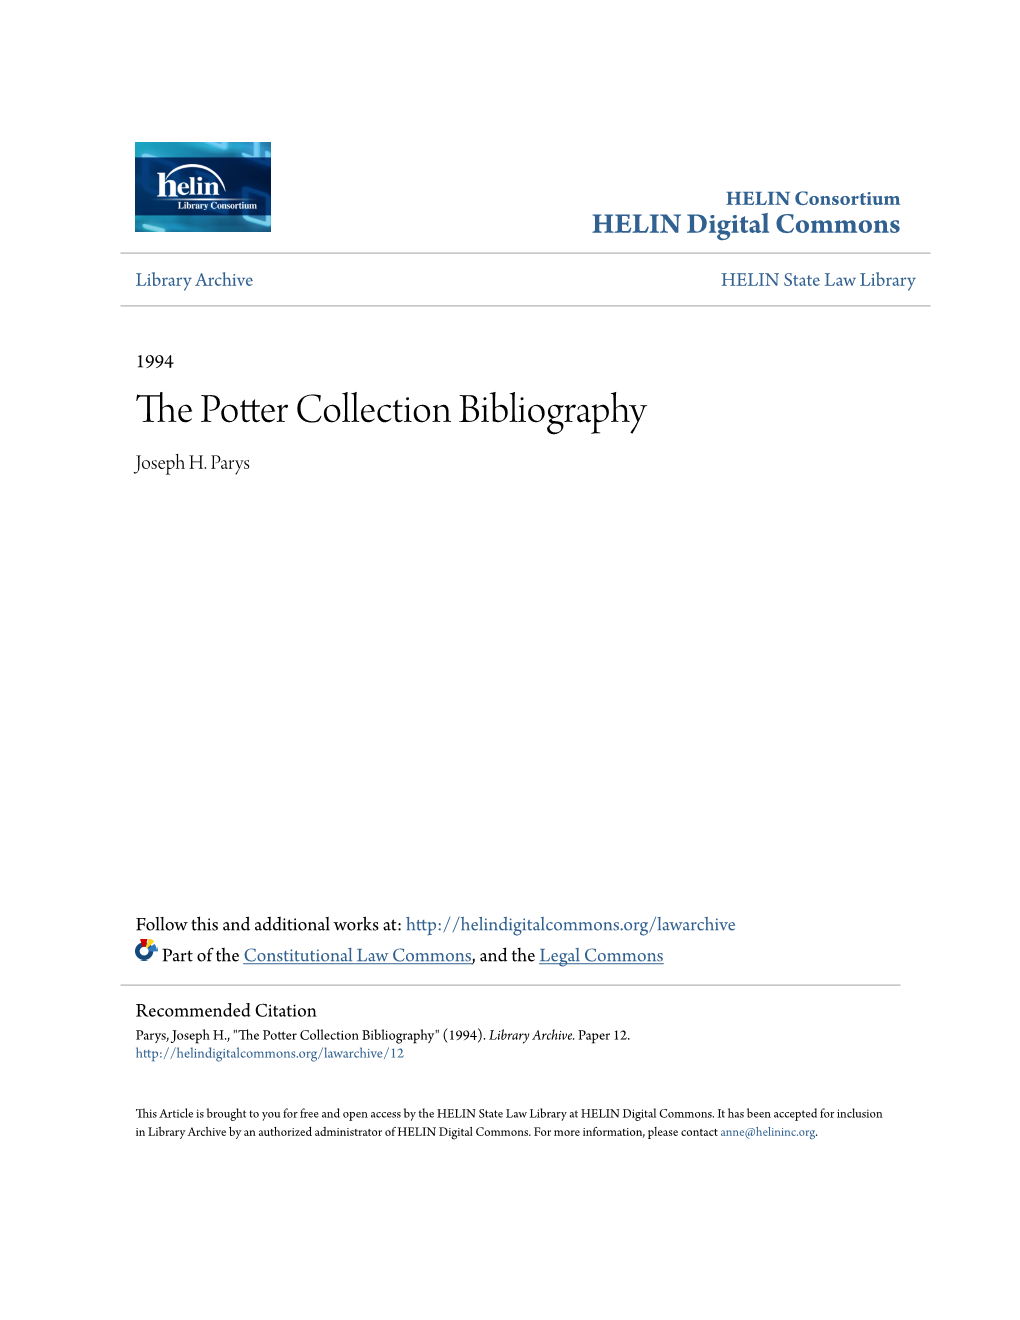 The Potter Collection Bibliography